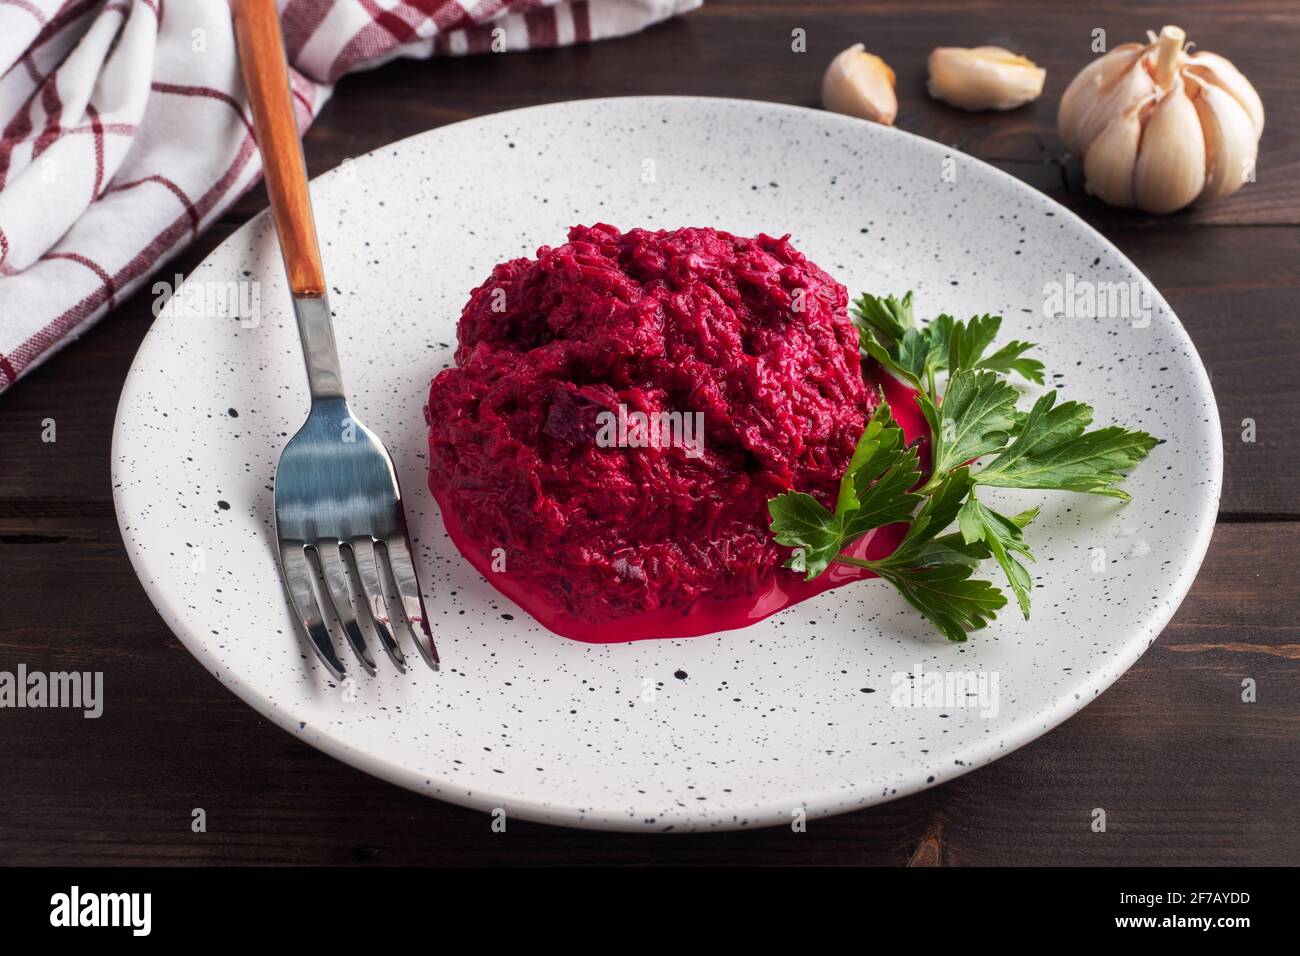 Salad of grated beetroot pine nuts and parsley with cream sauce on a plate Stock Photo